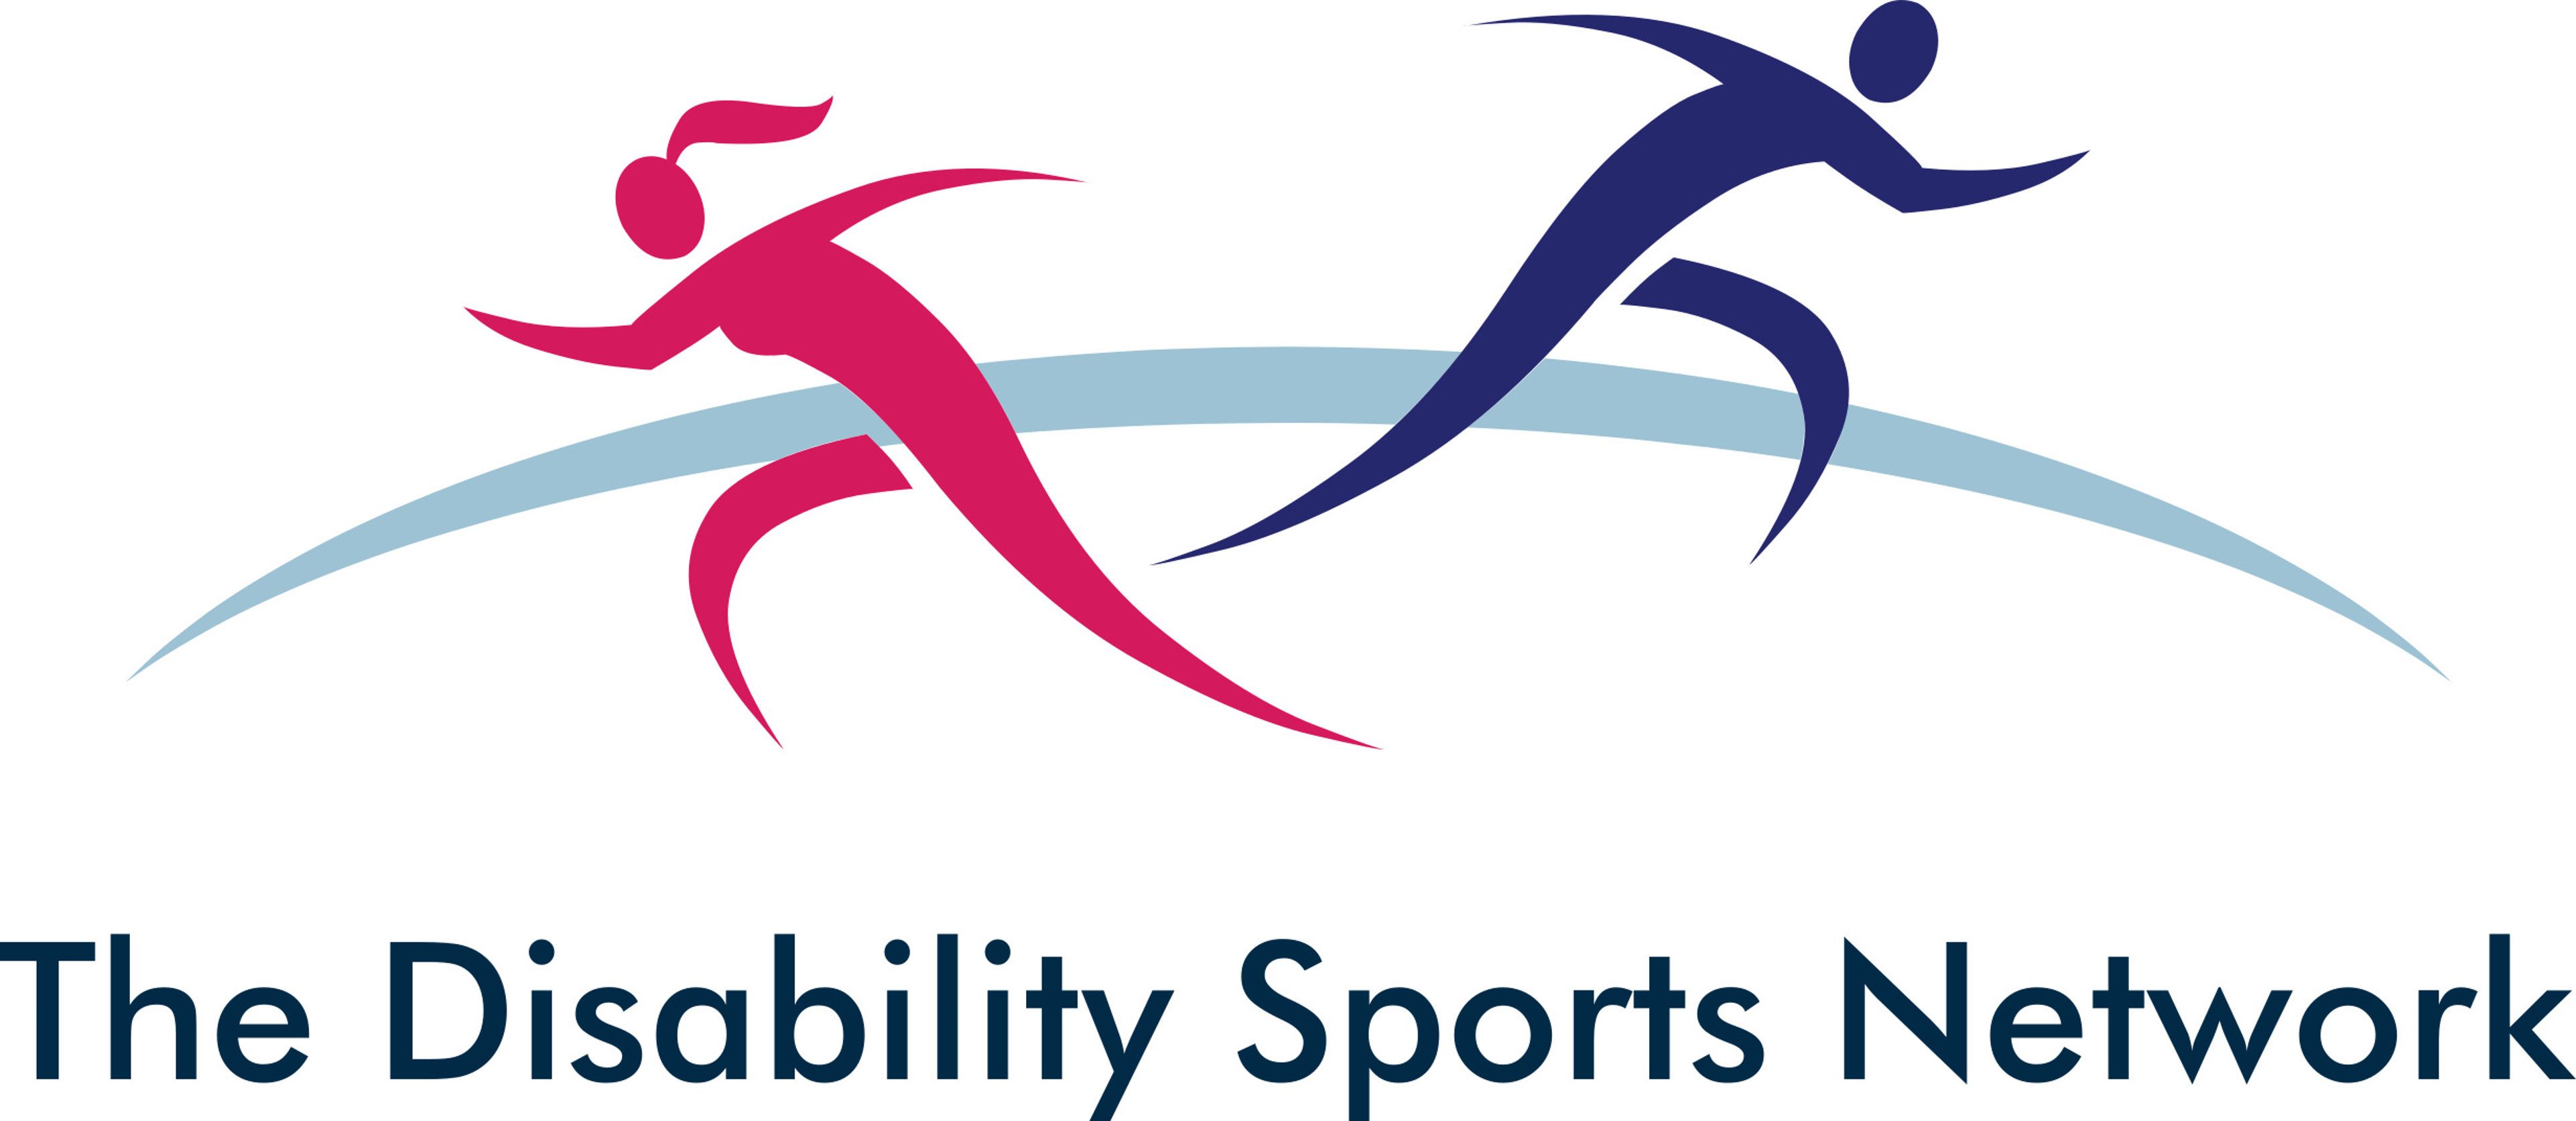 The Disability Sports Network